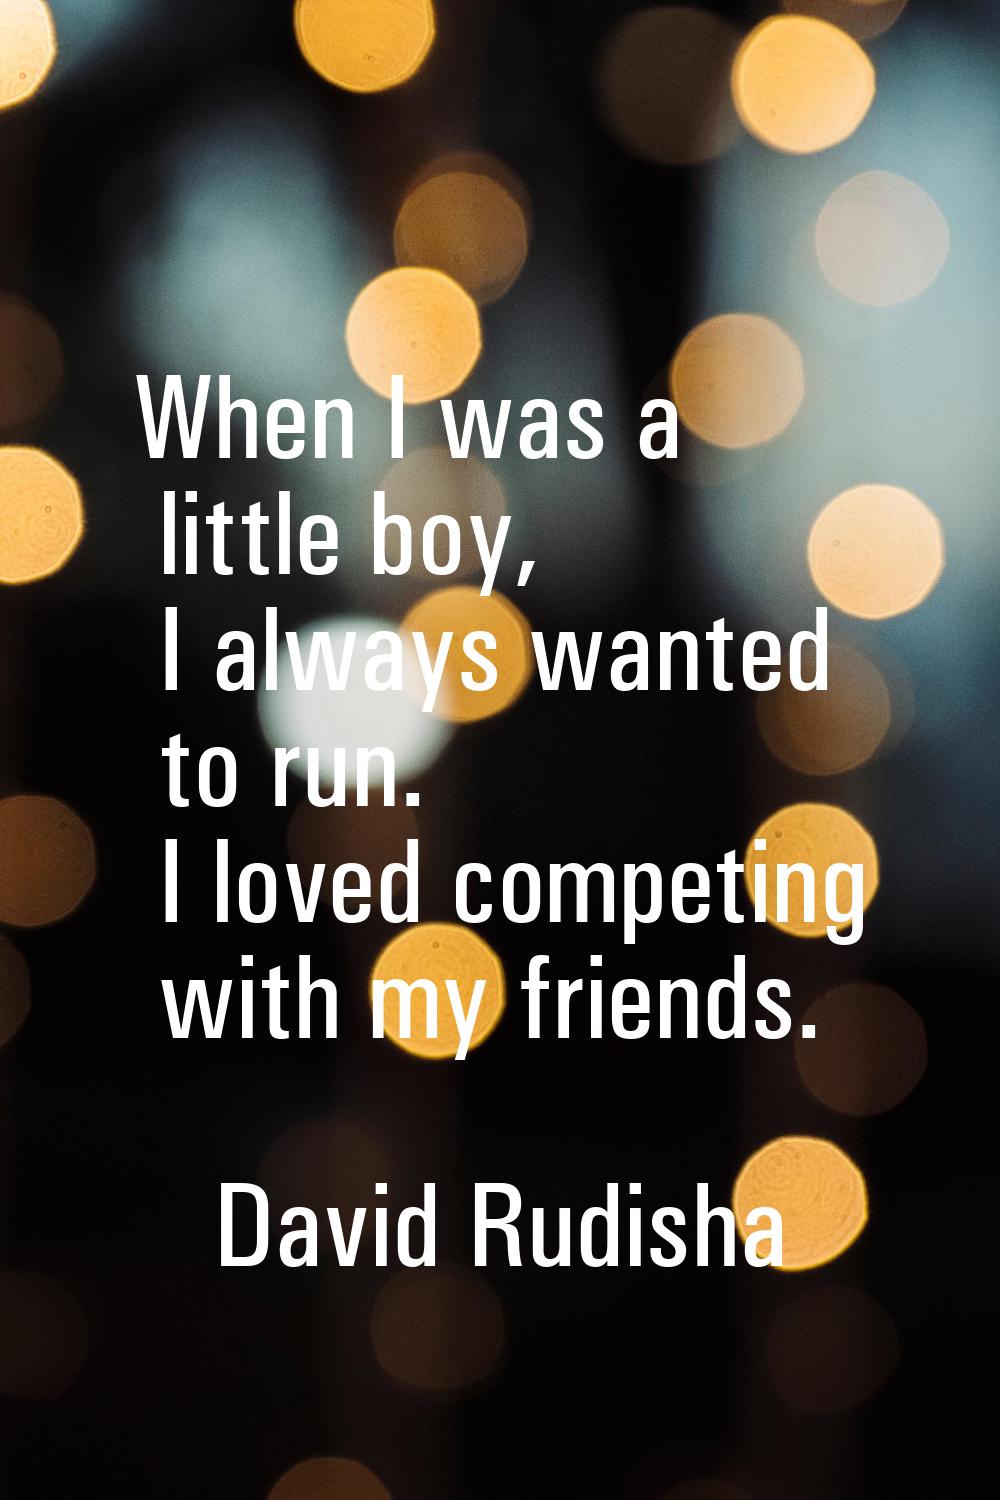 When I was a little boy, I always wanted to run. I loved competing with my friends.